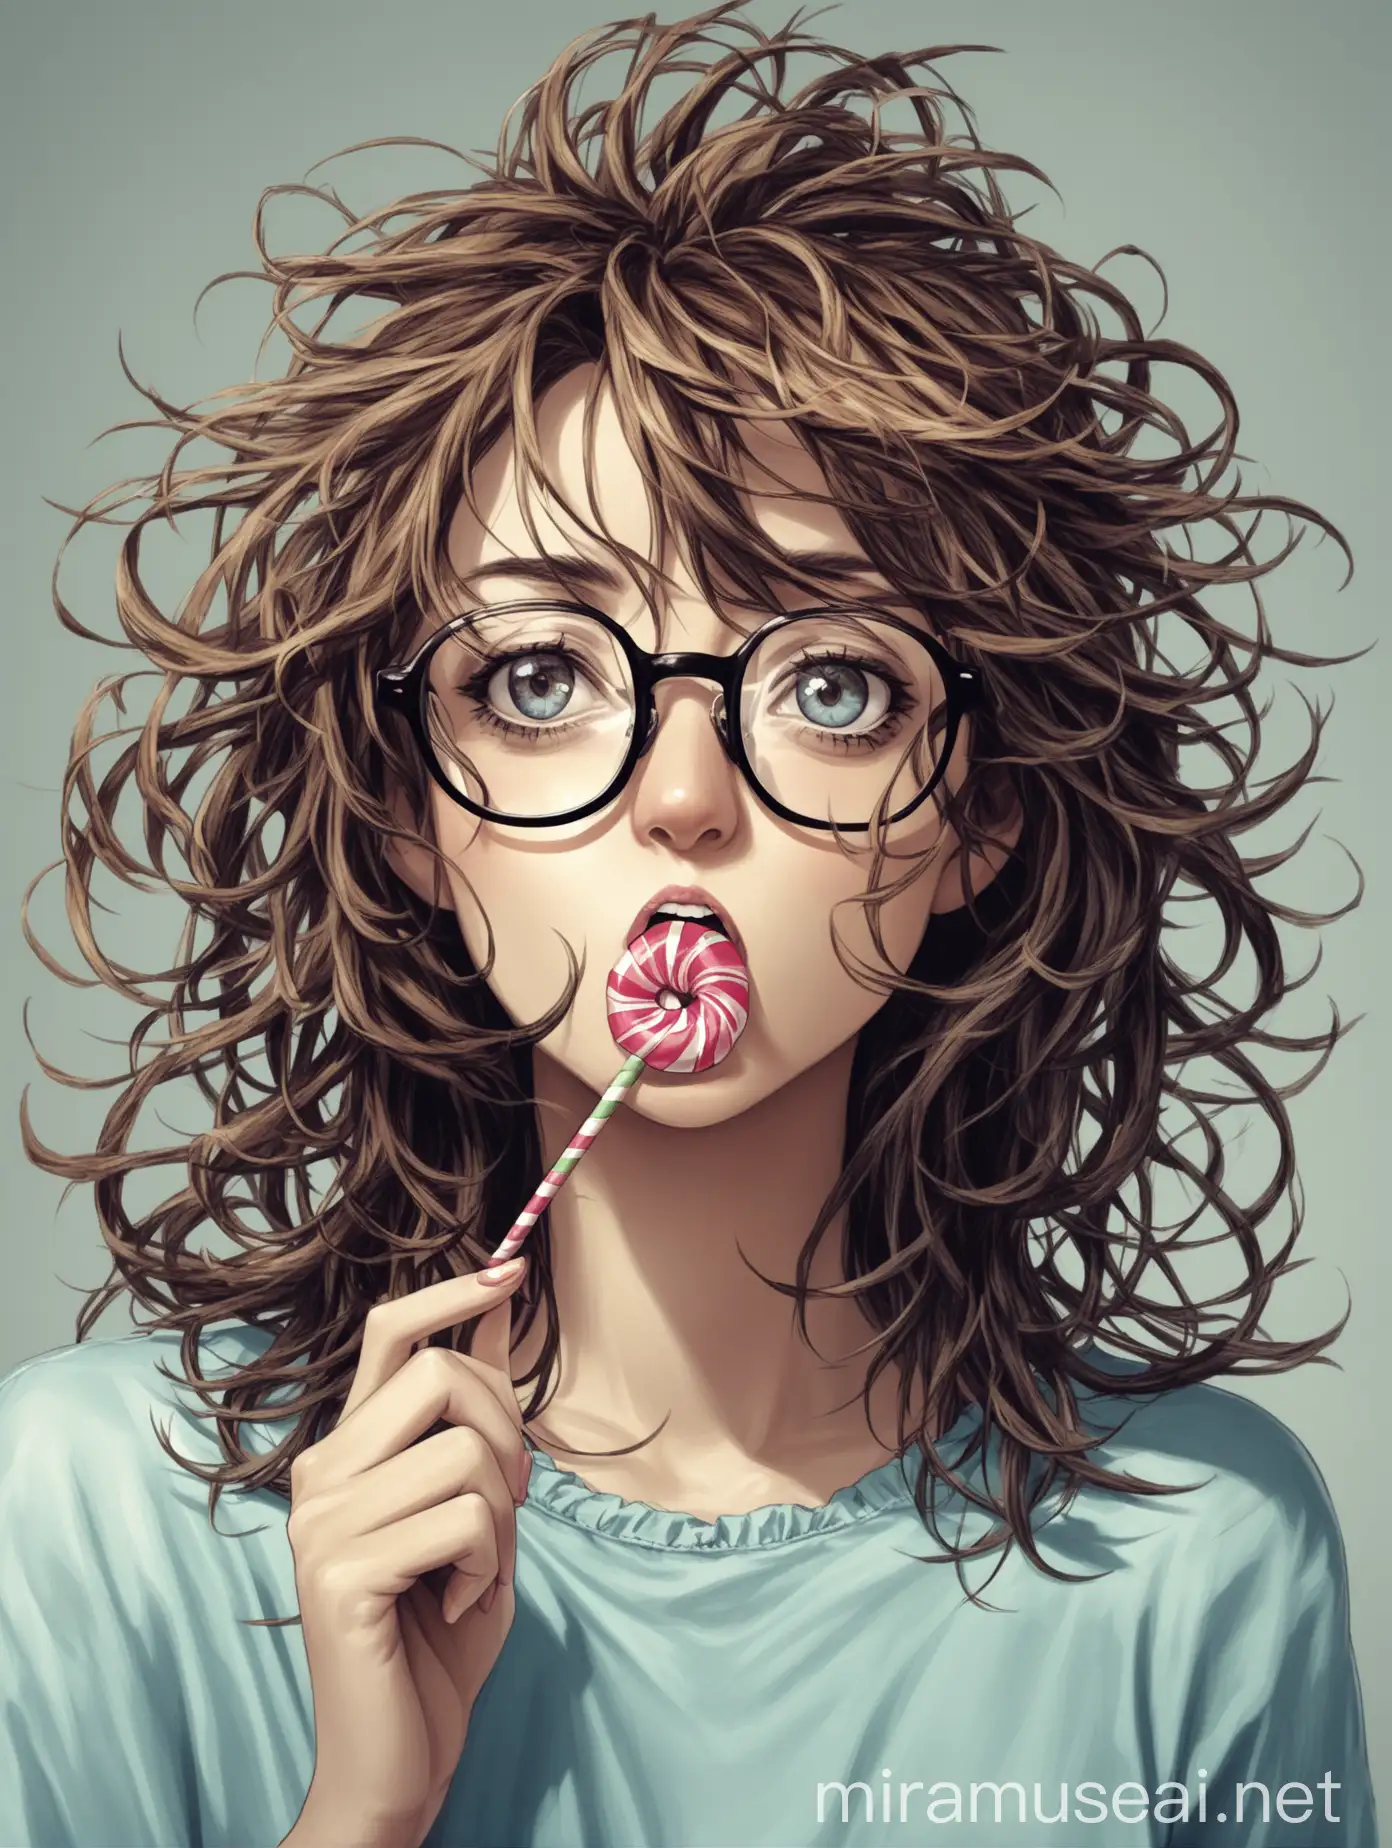 Woman with Glasses and Messy Hair Eating Candy